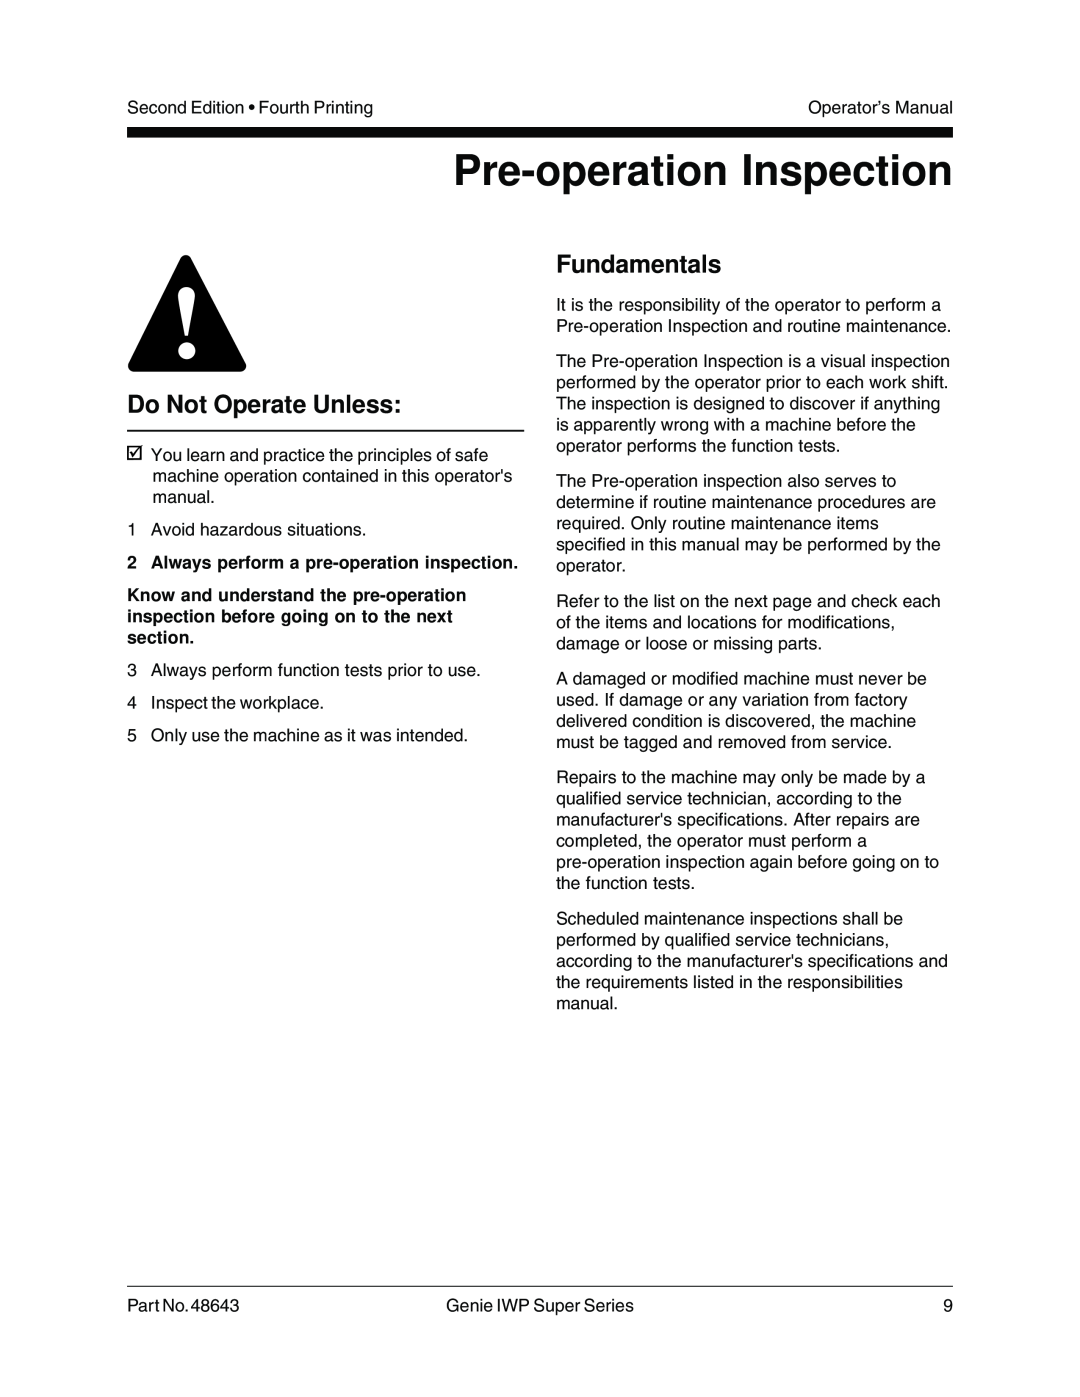 Genie 48643 manual Pre-operationInspection, Fundamentals, 2Always perform a pre-operationinspection, Do Not Operate Unless 